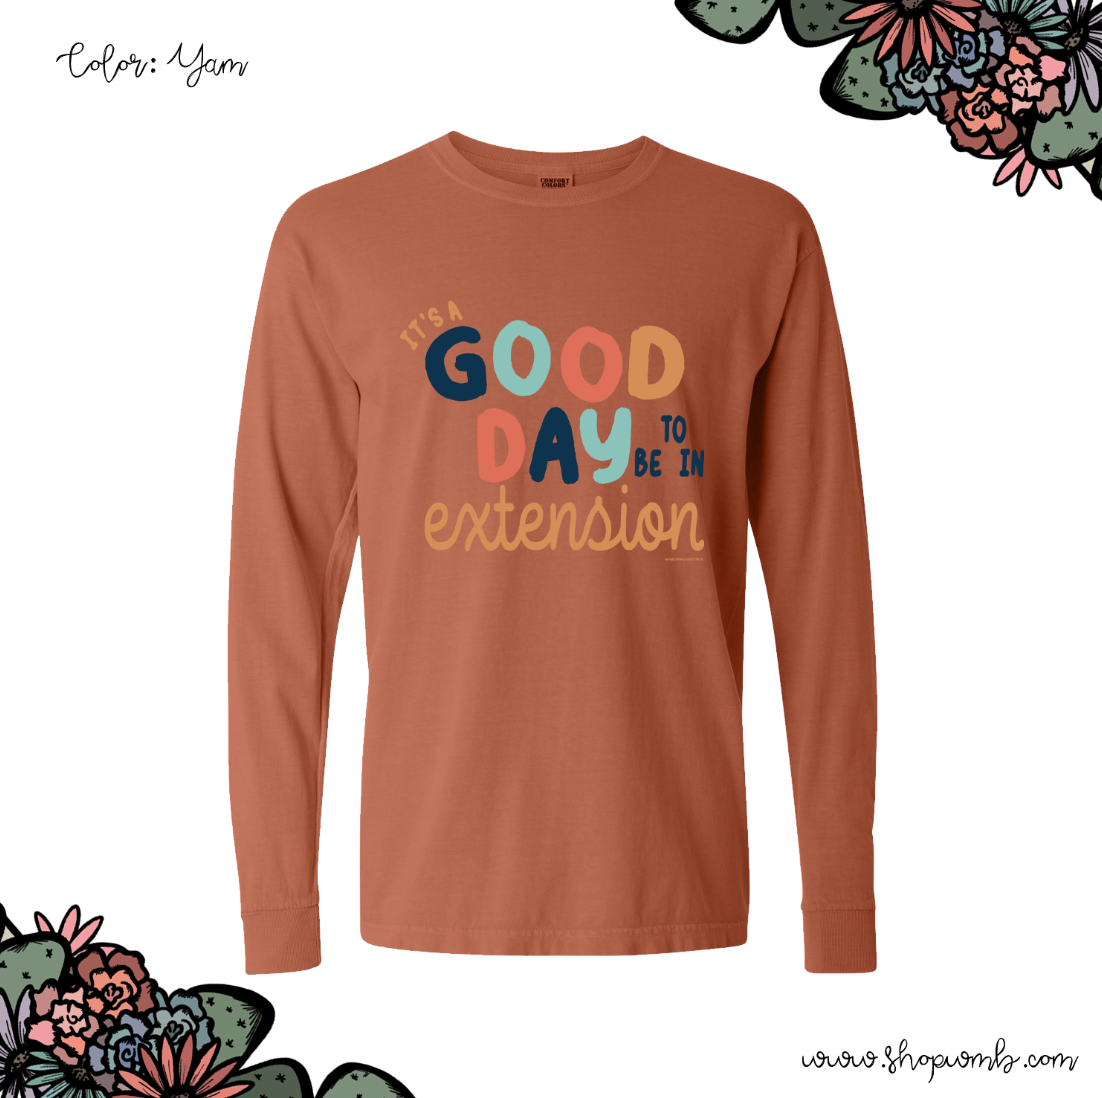 It's A Good Day To Be In Extension LONG SLEEVE T-Shirt (S-3XL) - Multiple Colors!